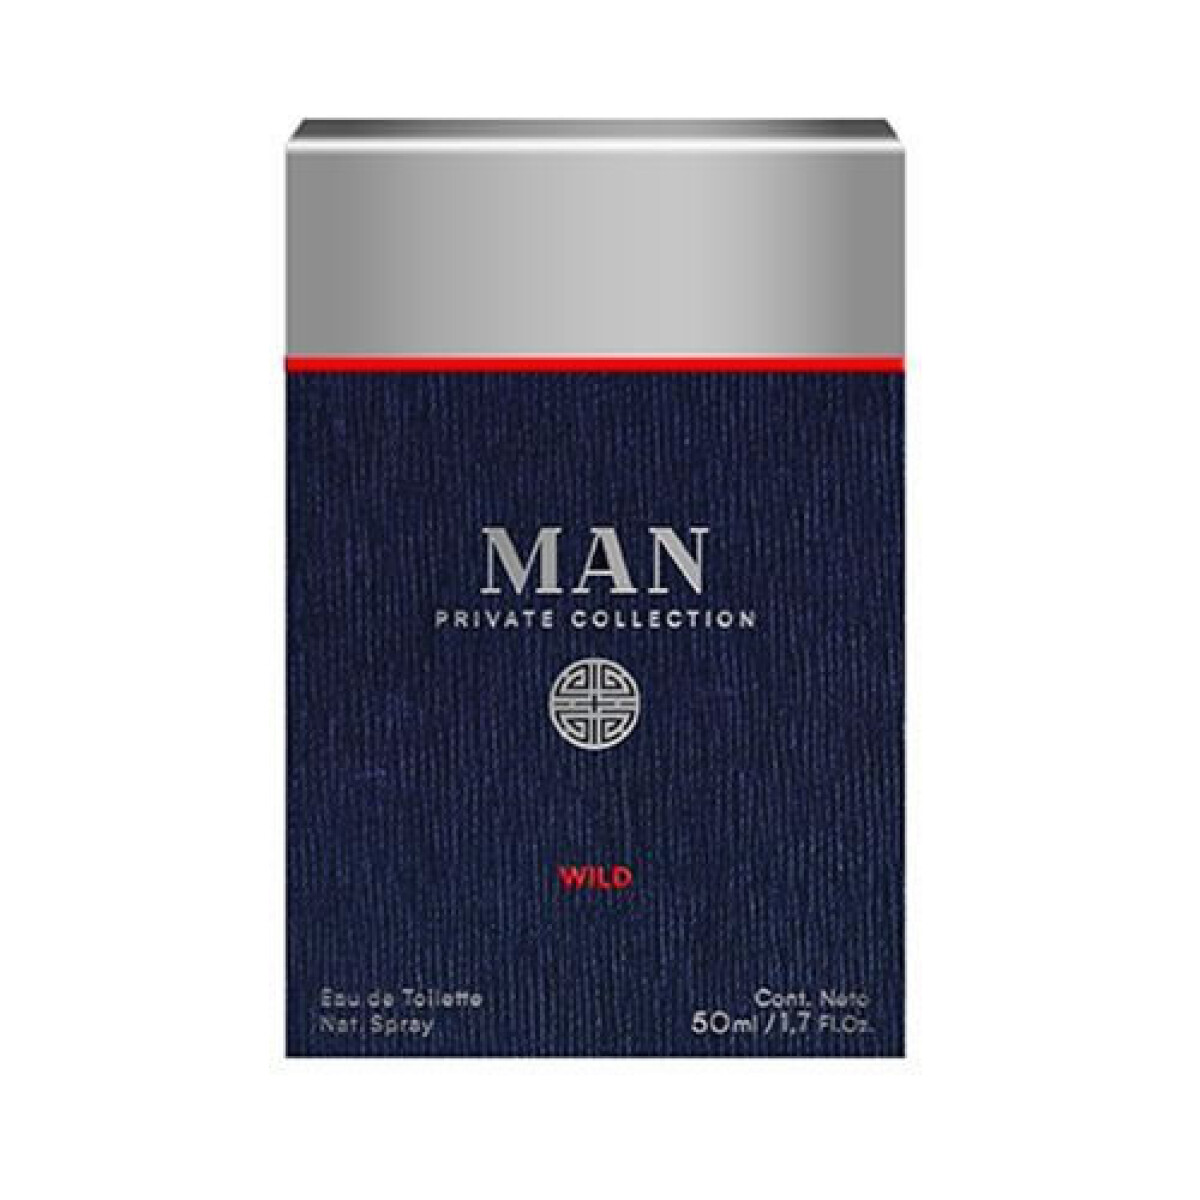 FRAGANCIA MAN PRIVATE COLLECTION WILD EDT 50 ML 